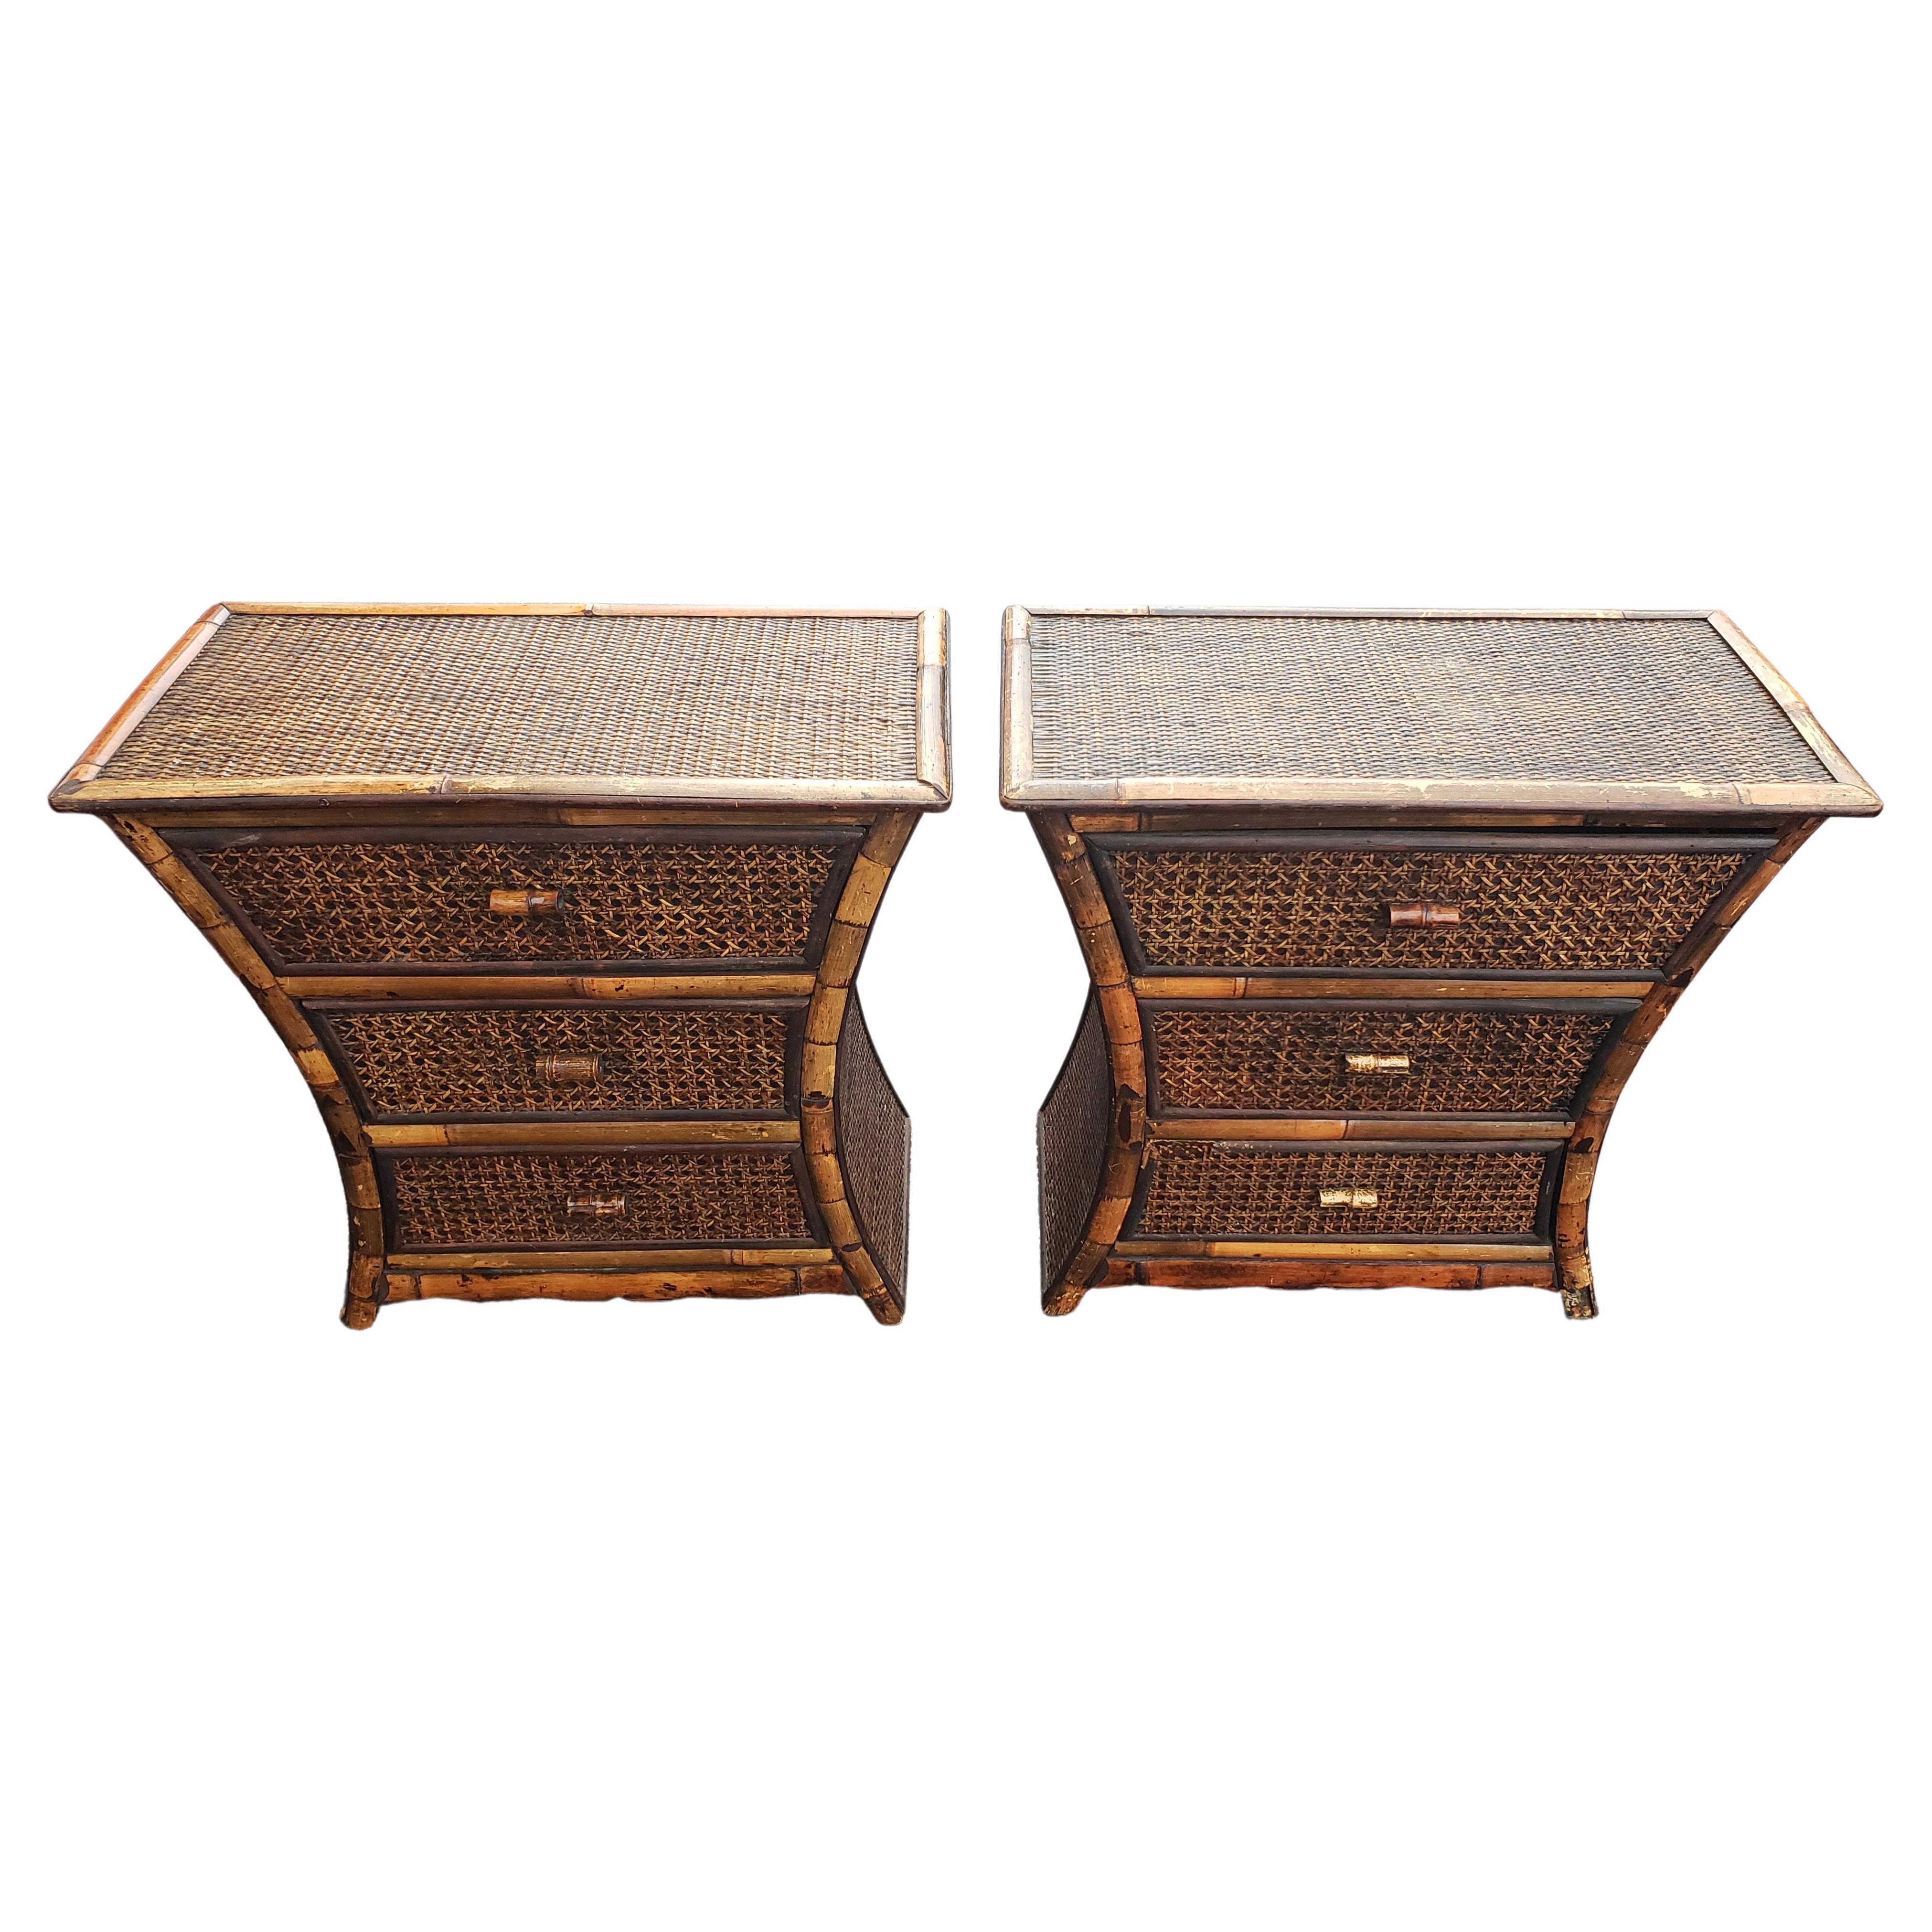 Chinese Vintage Bamboo and Wicker Side Tables Nightstands, circa 1940s, a Pair